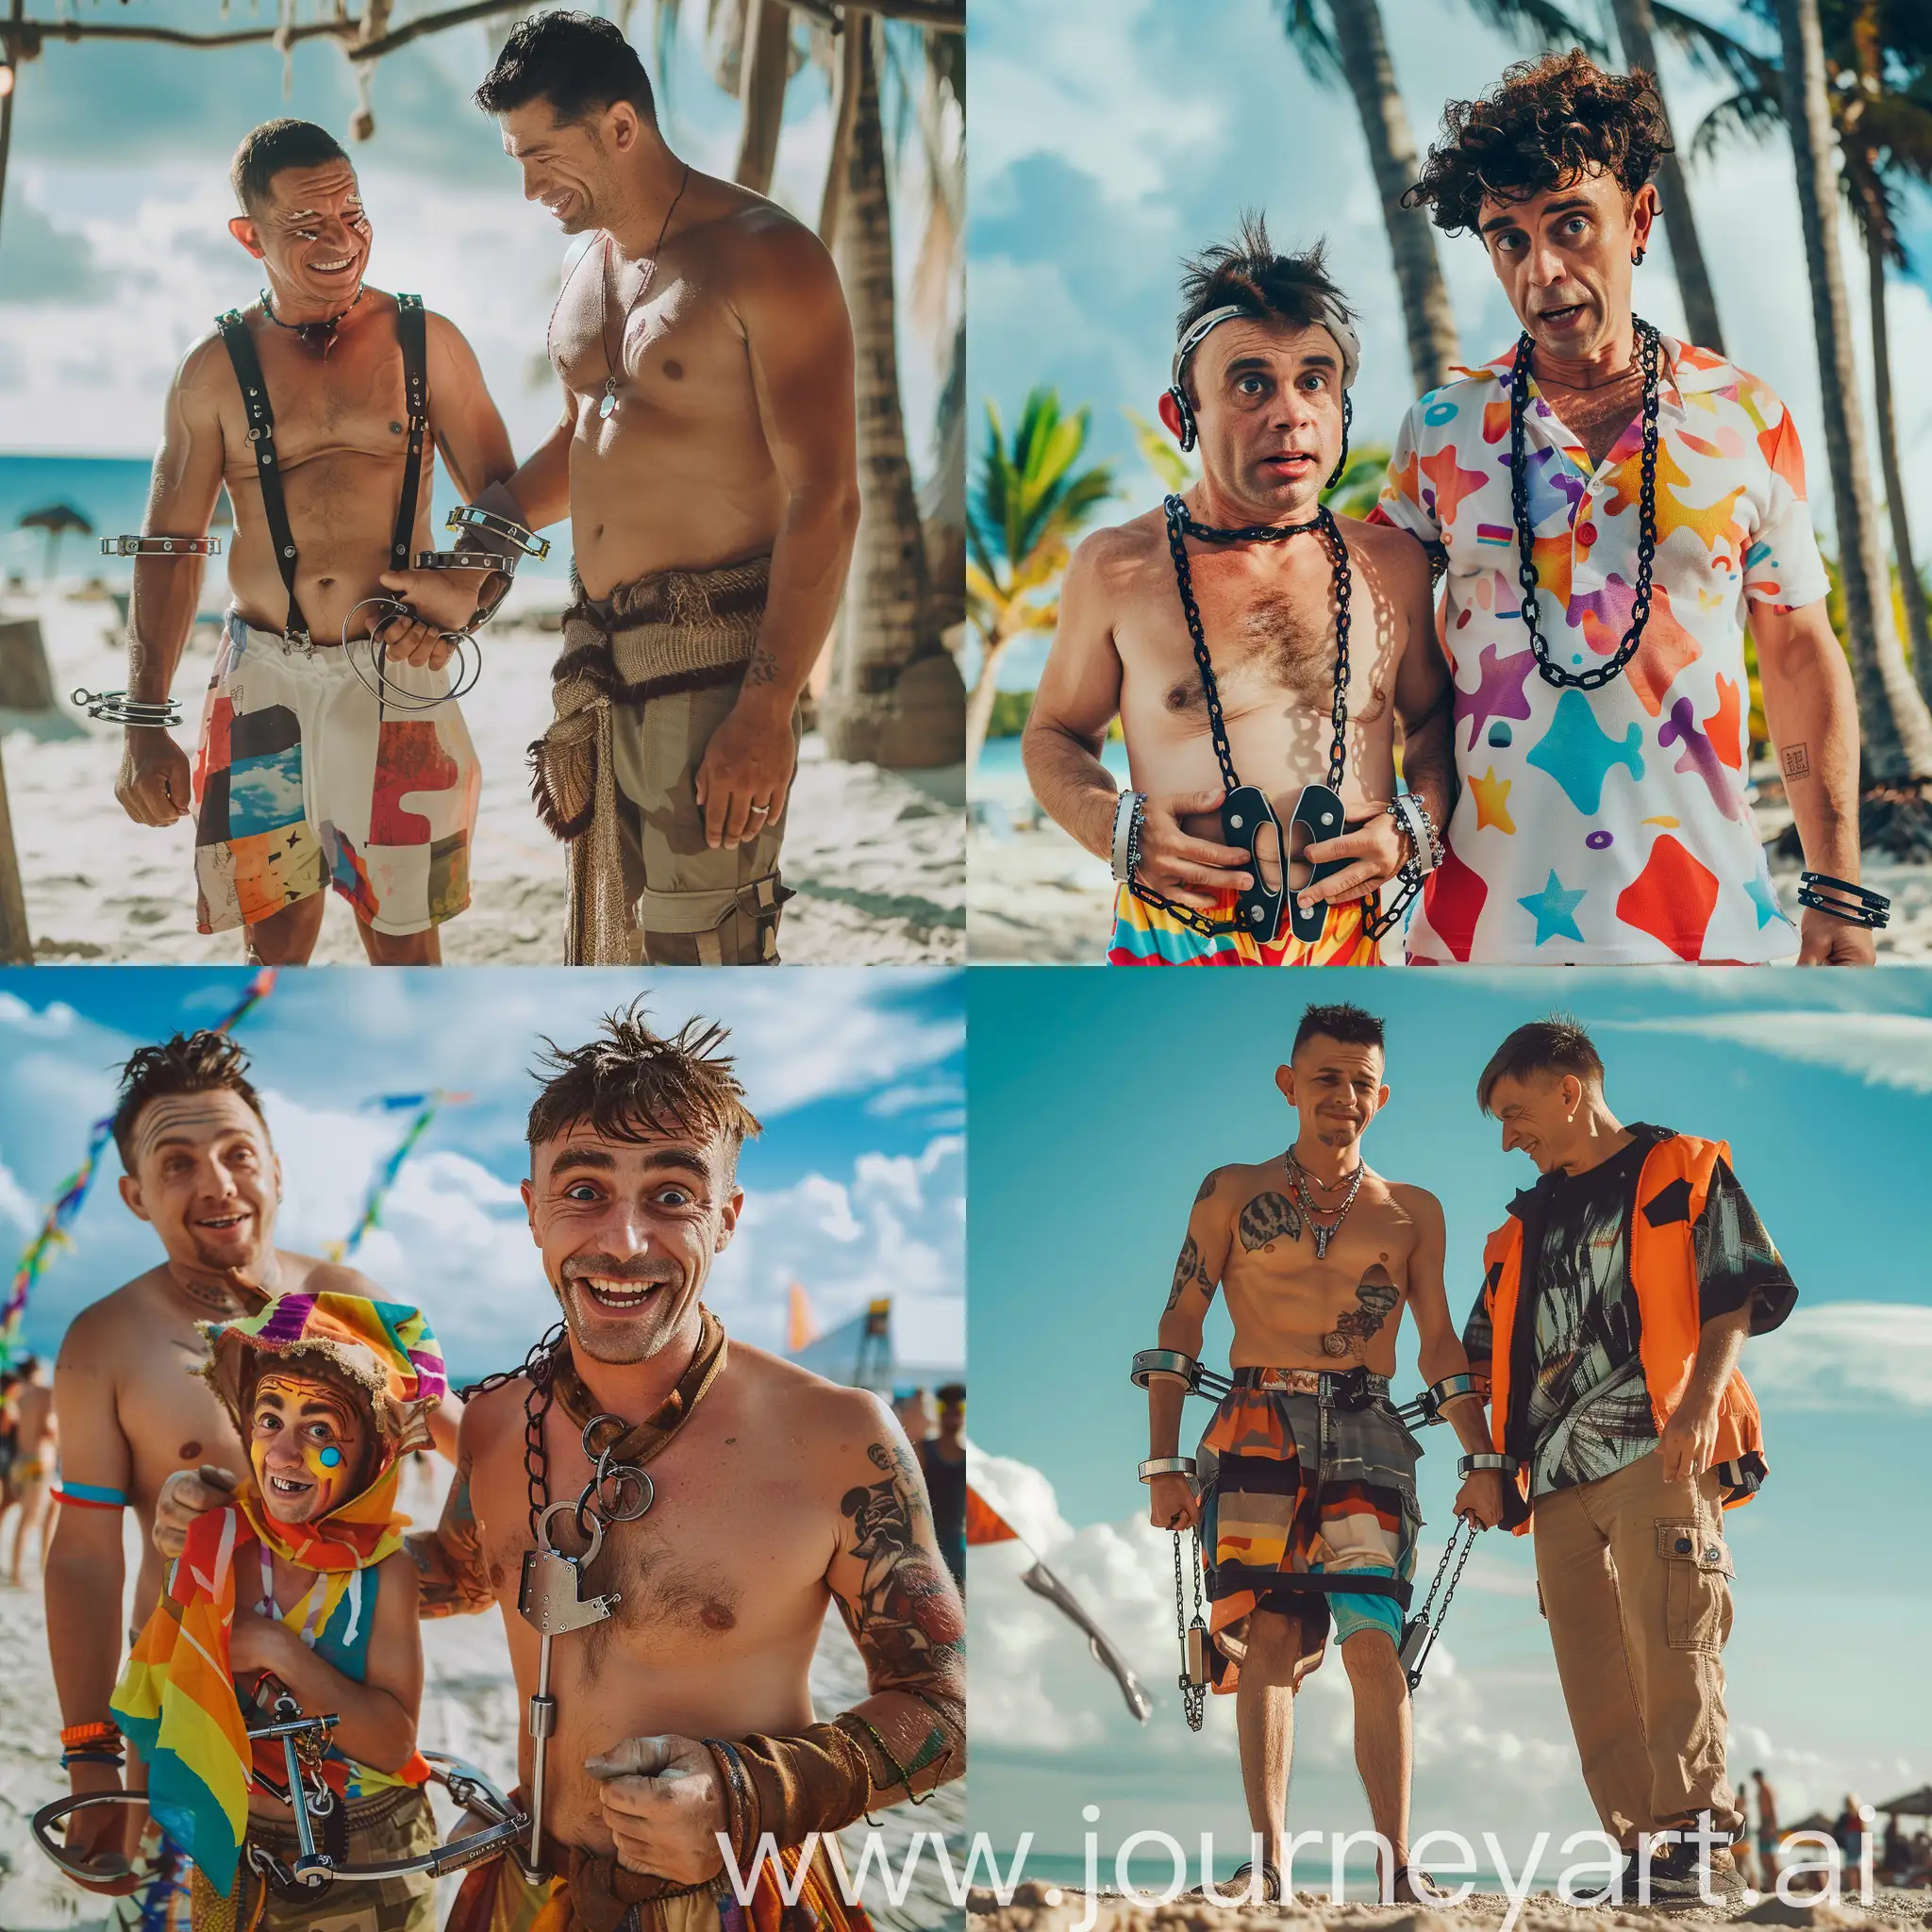 a male man with dwarfism, wearing handcuffs with a tall man, the man with dwarfism is wearing a funny costume, they are on a beach, at a party destination. high quality, real photo, bright,